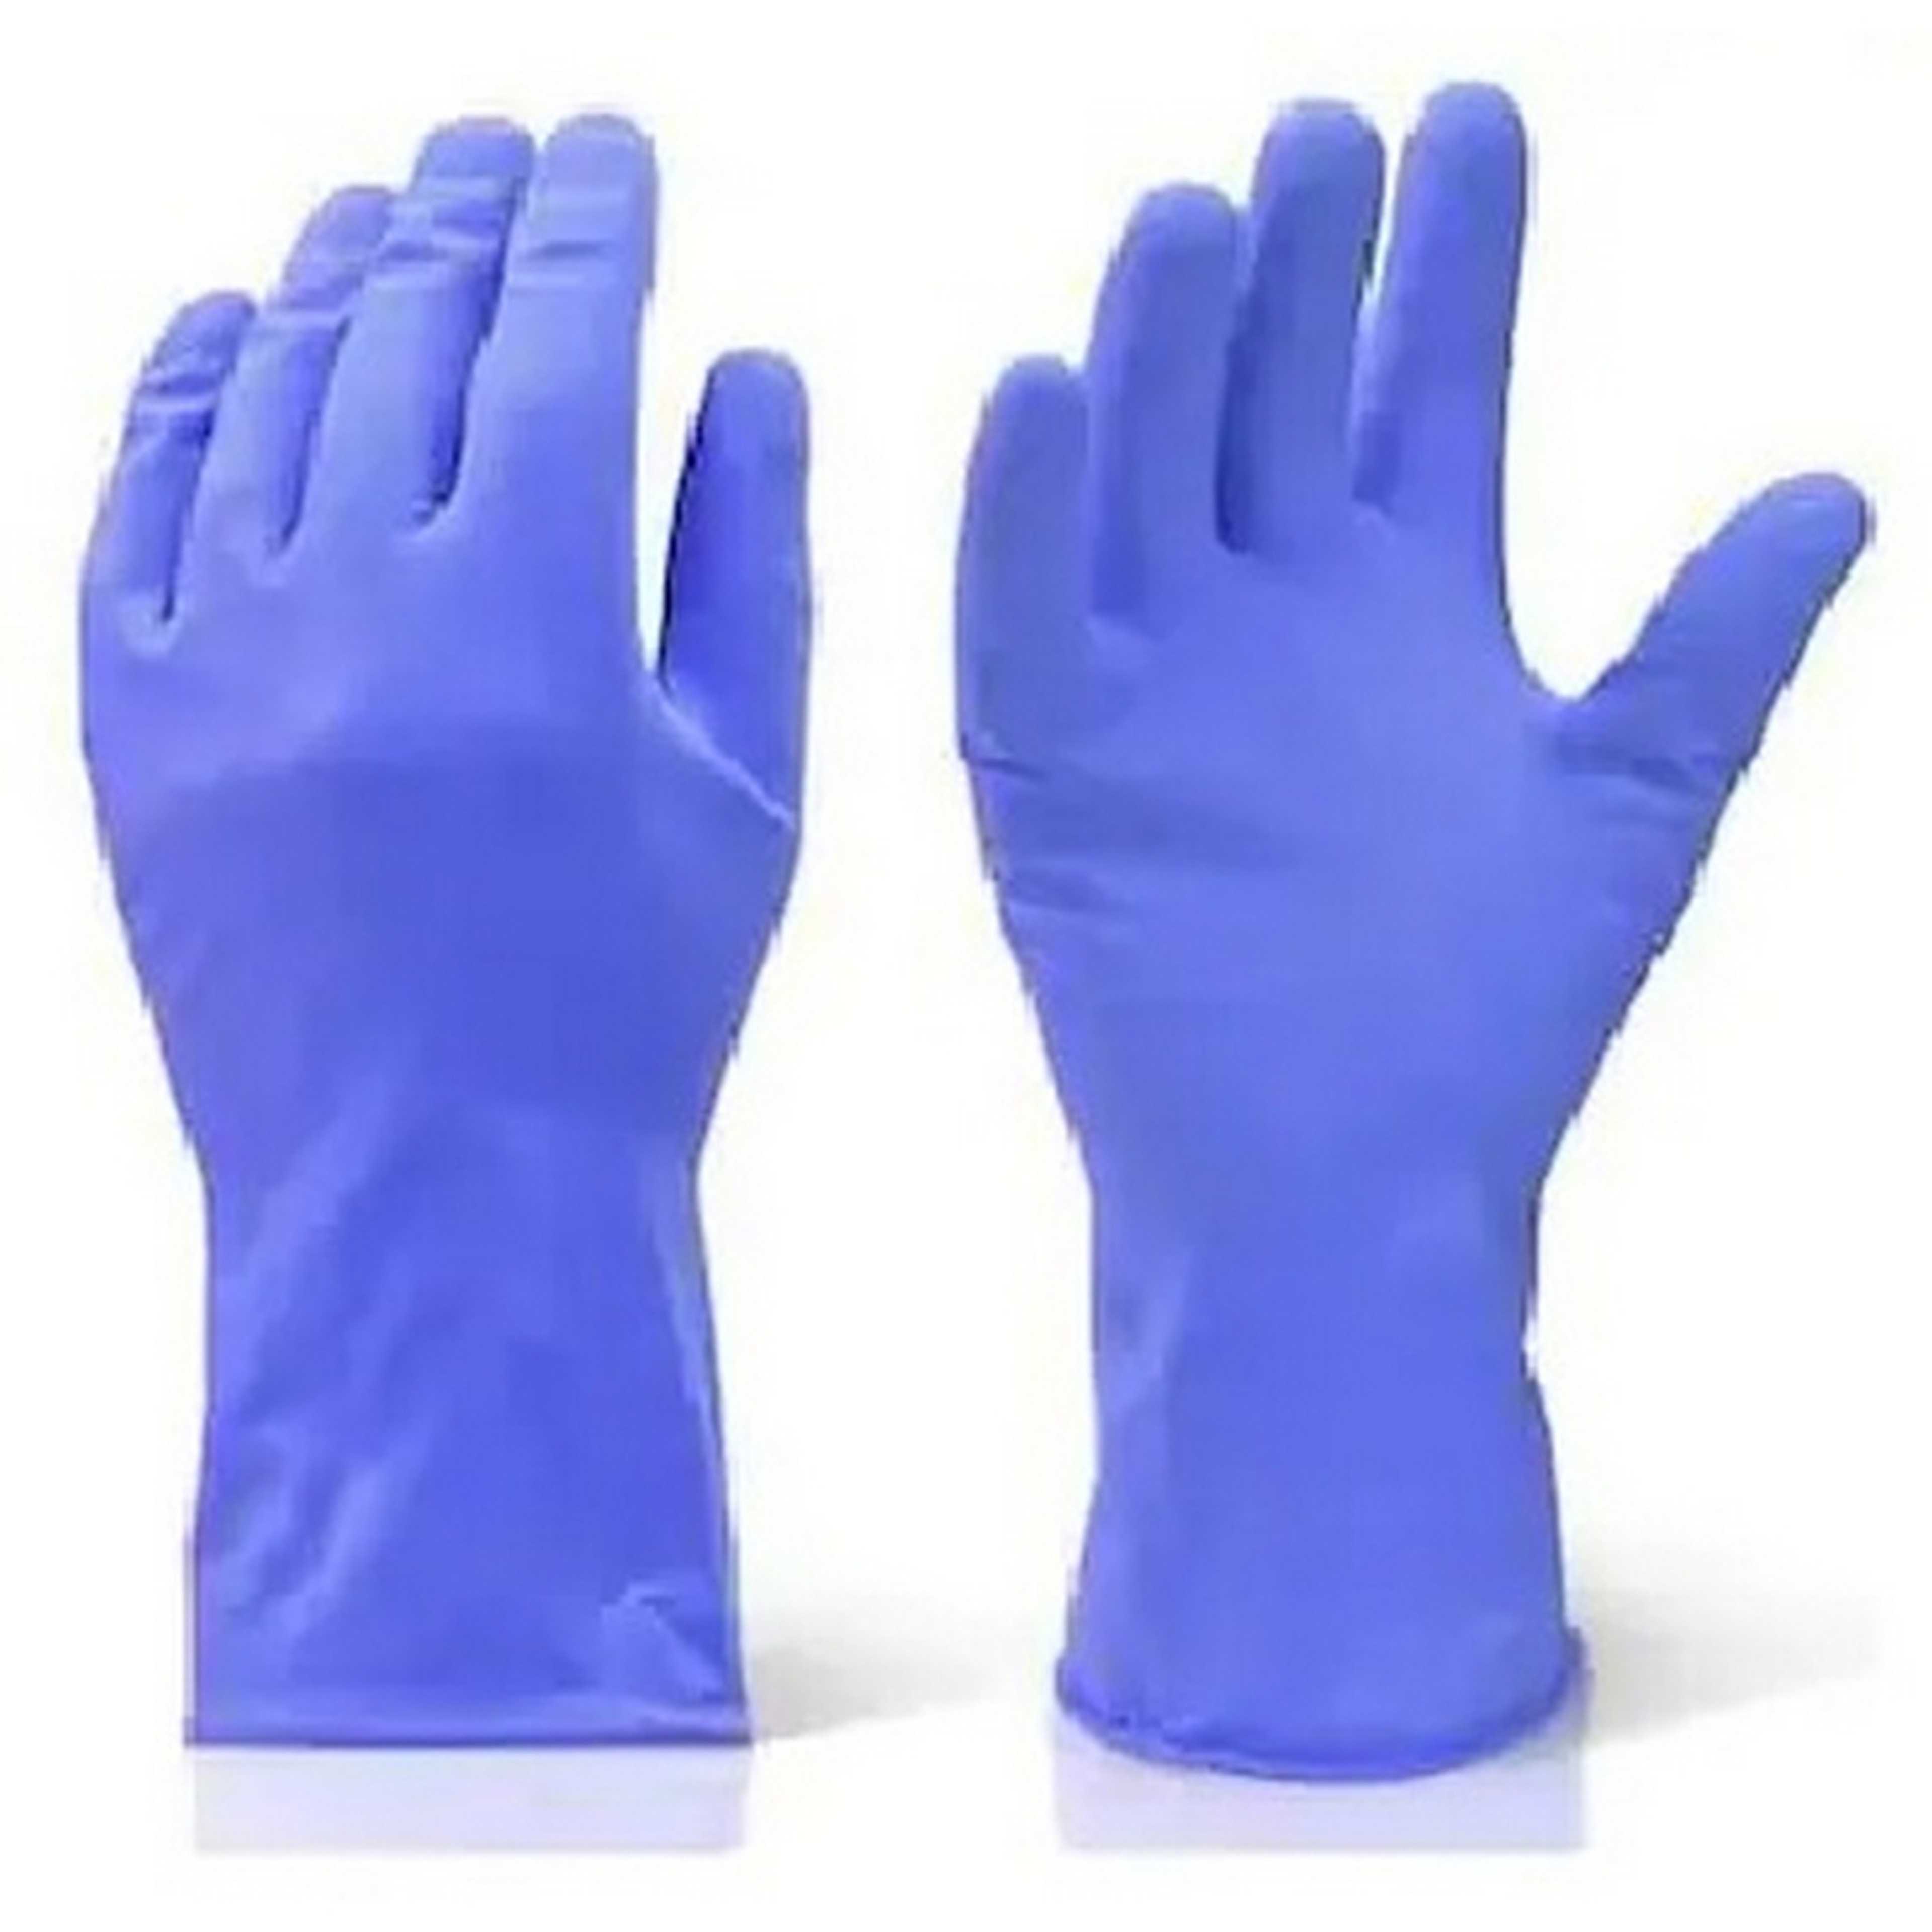 NDM kitchen Washing Hand cleaning Gloves waterproof gloves for Washing